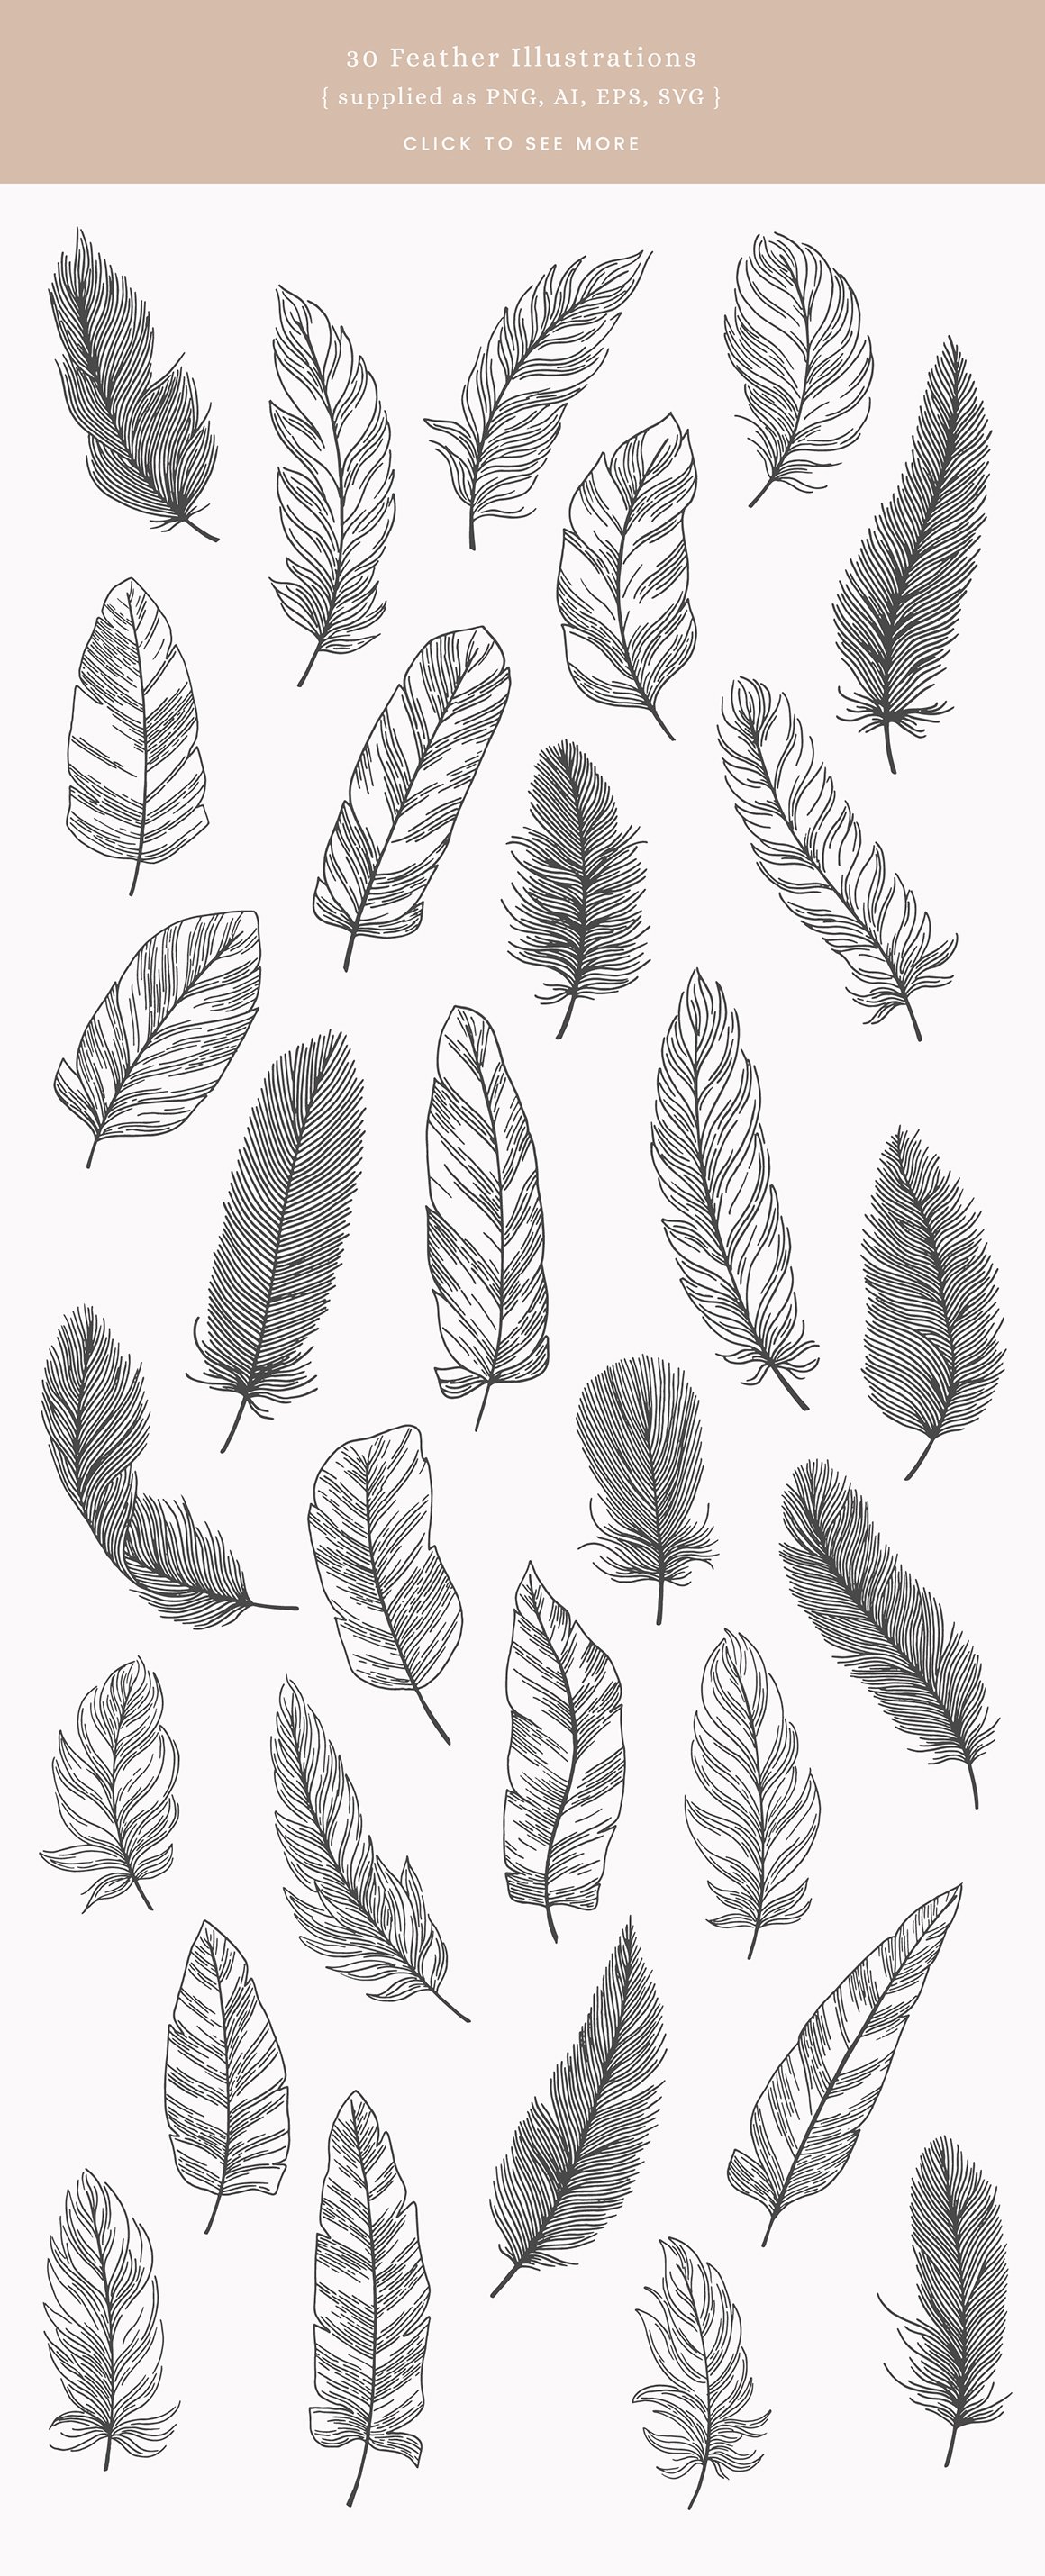 Feathers Vector Illustrations